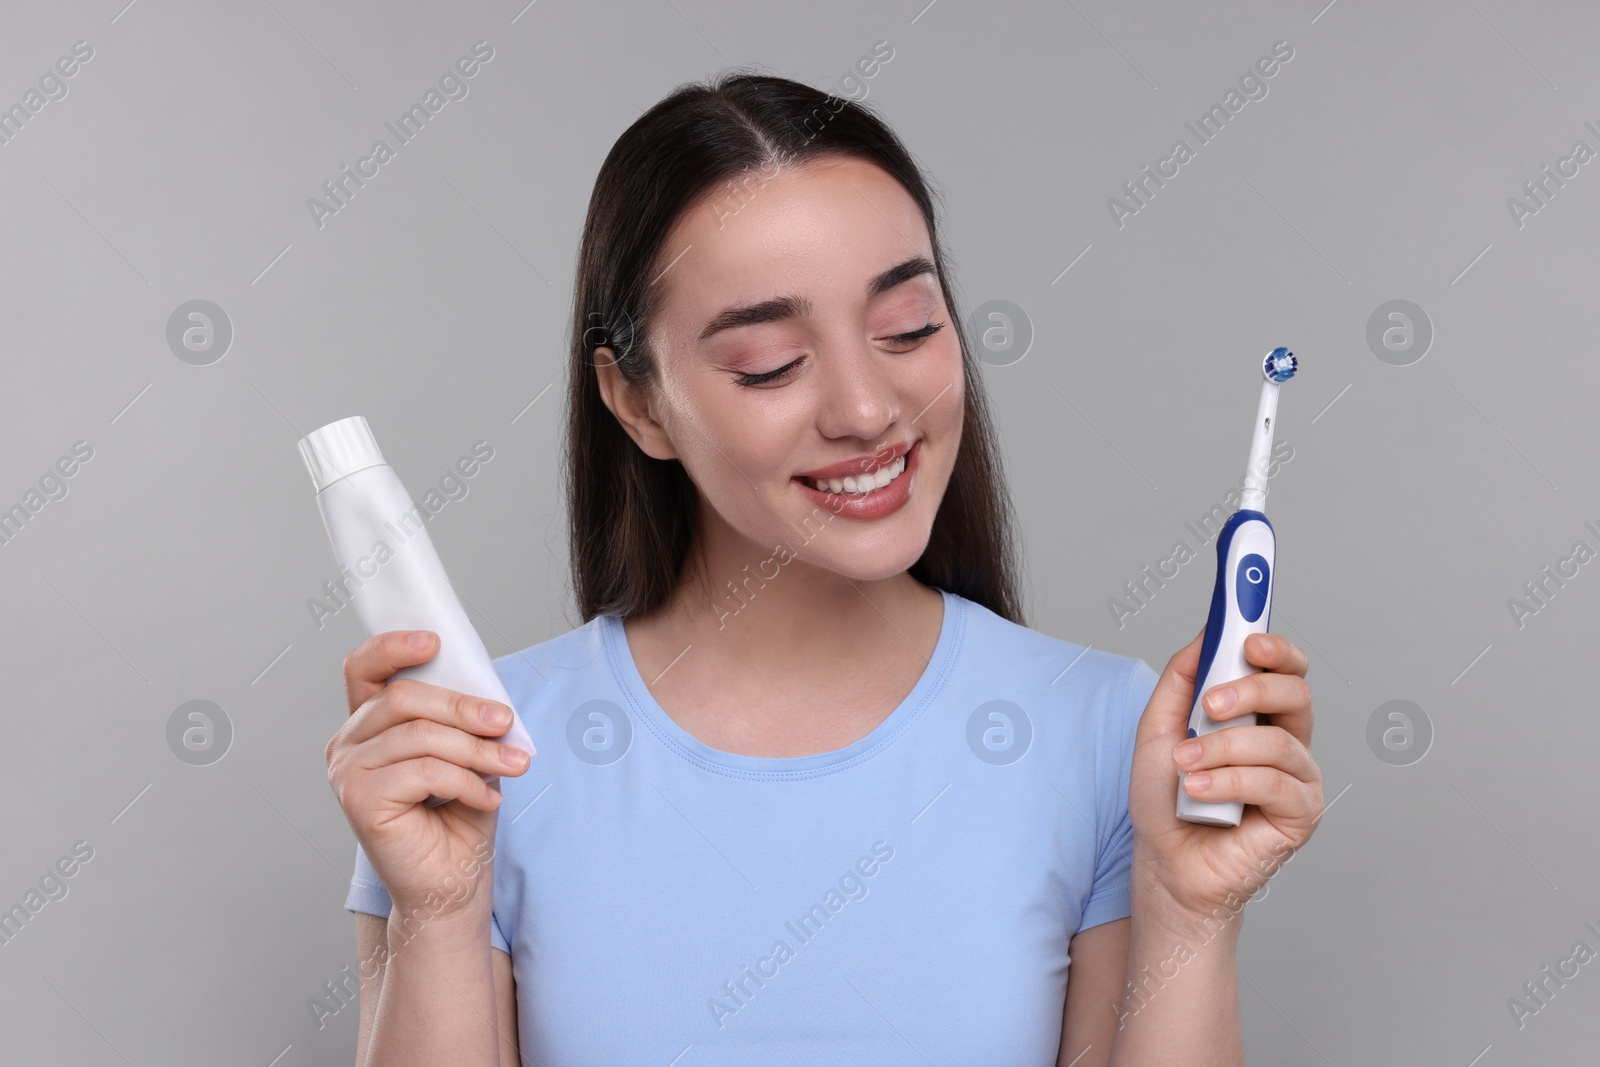 Photo of Happy young woman holding electric toothbrush and tube of toothpaste on light grey background